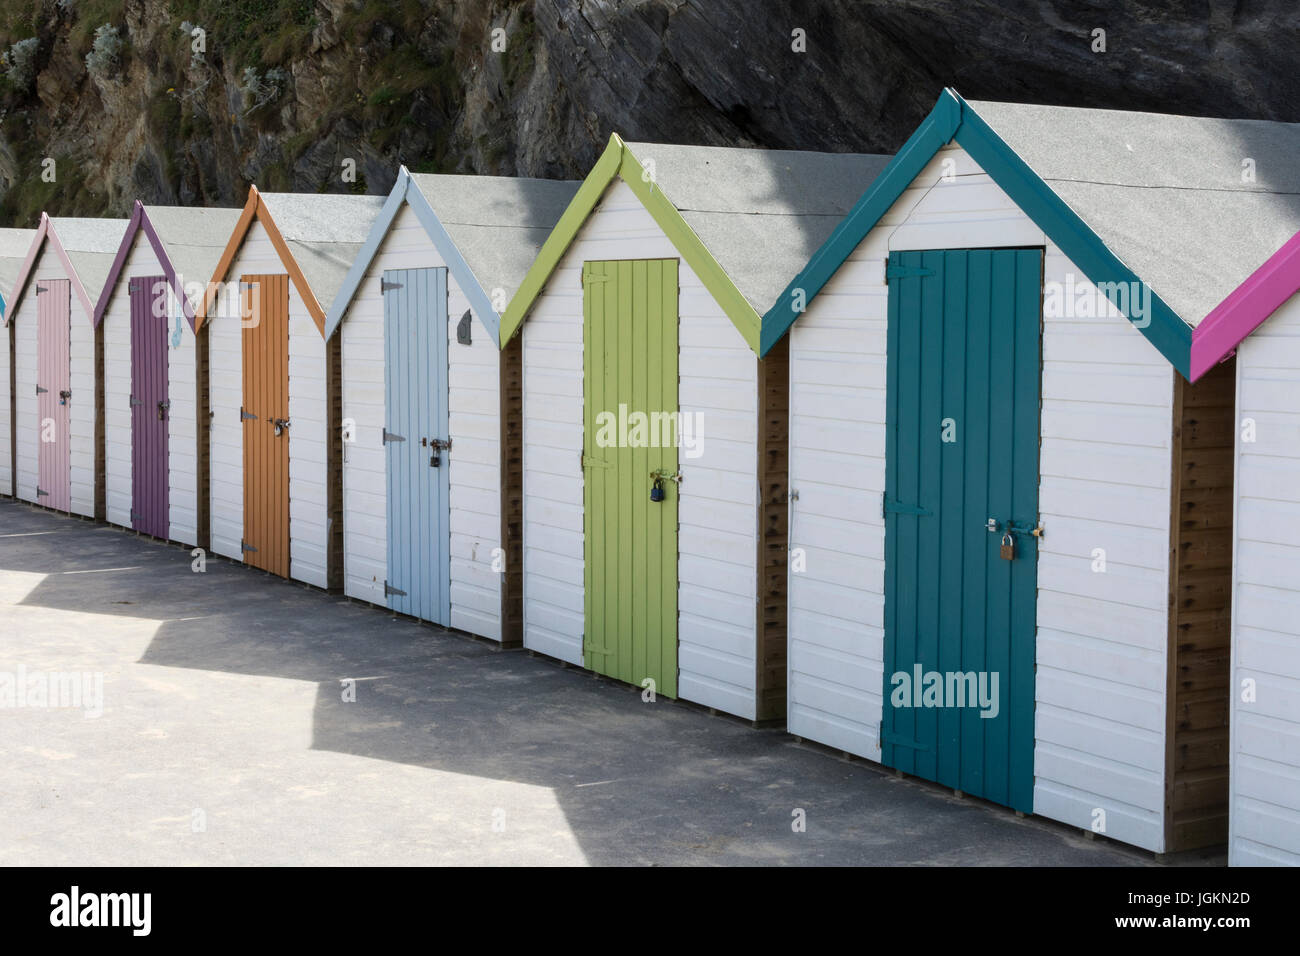 Row of colourful beach huts at Newquay, Cornwall. Seaside, surf shacks, beach-huts for hire. Staycation UK metaphor. Stock Photo